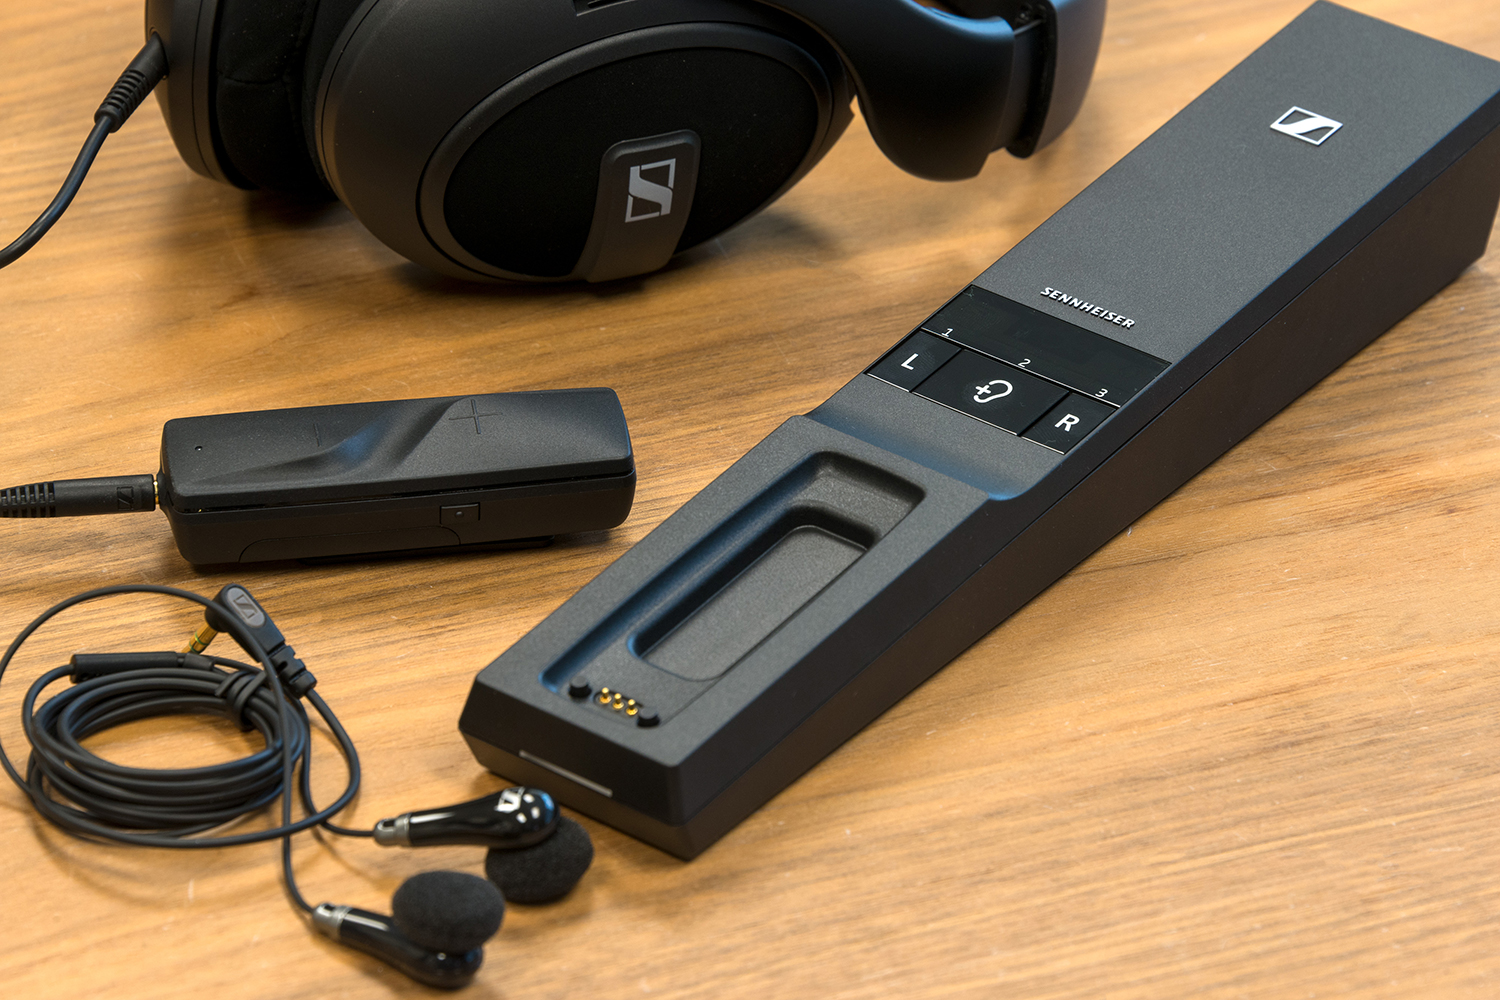 Sennheiser's Flex 5000 lets you blast the TV, while keeping the